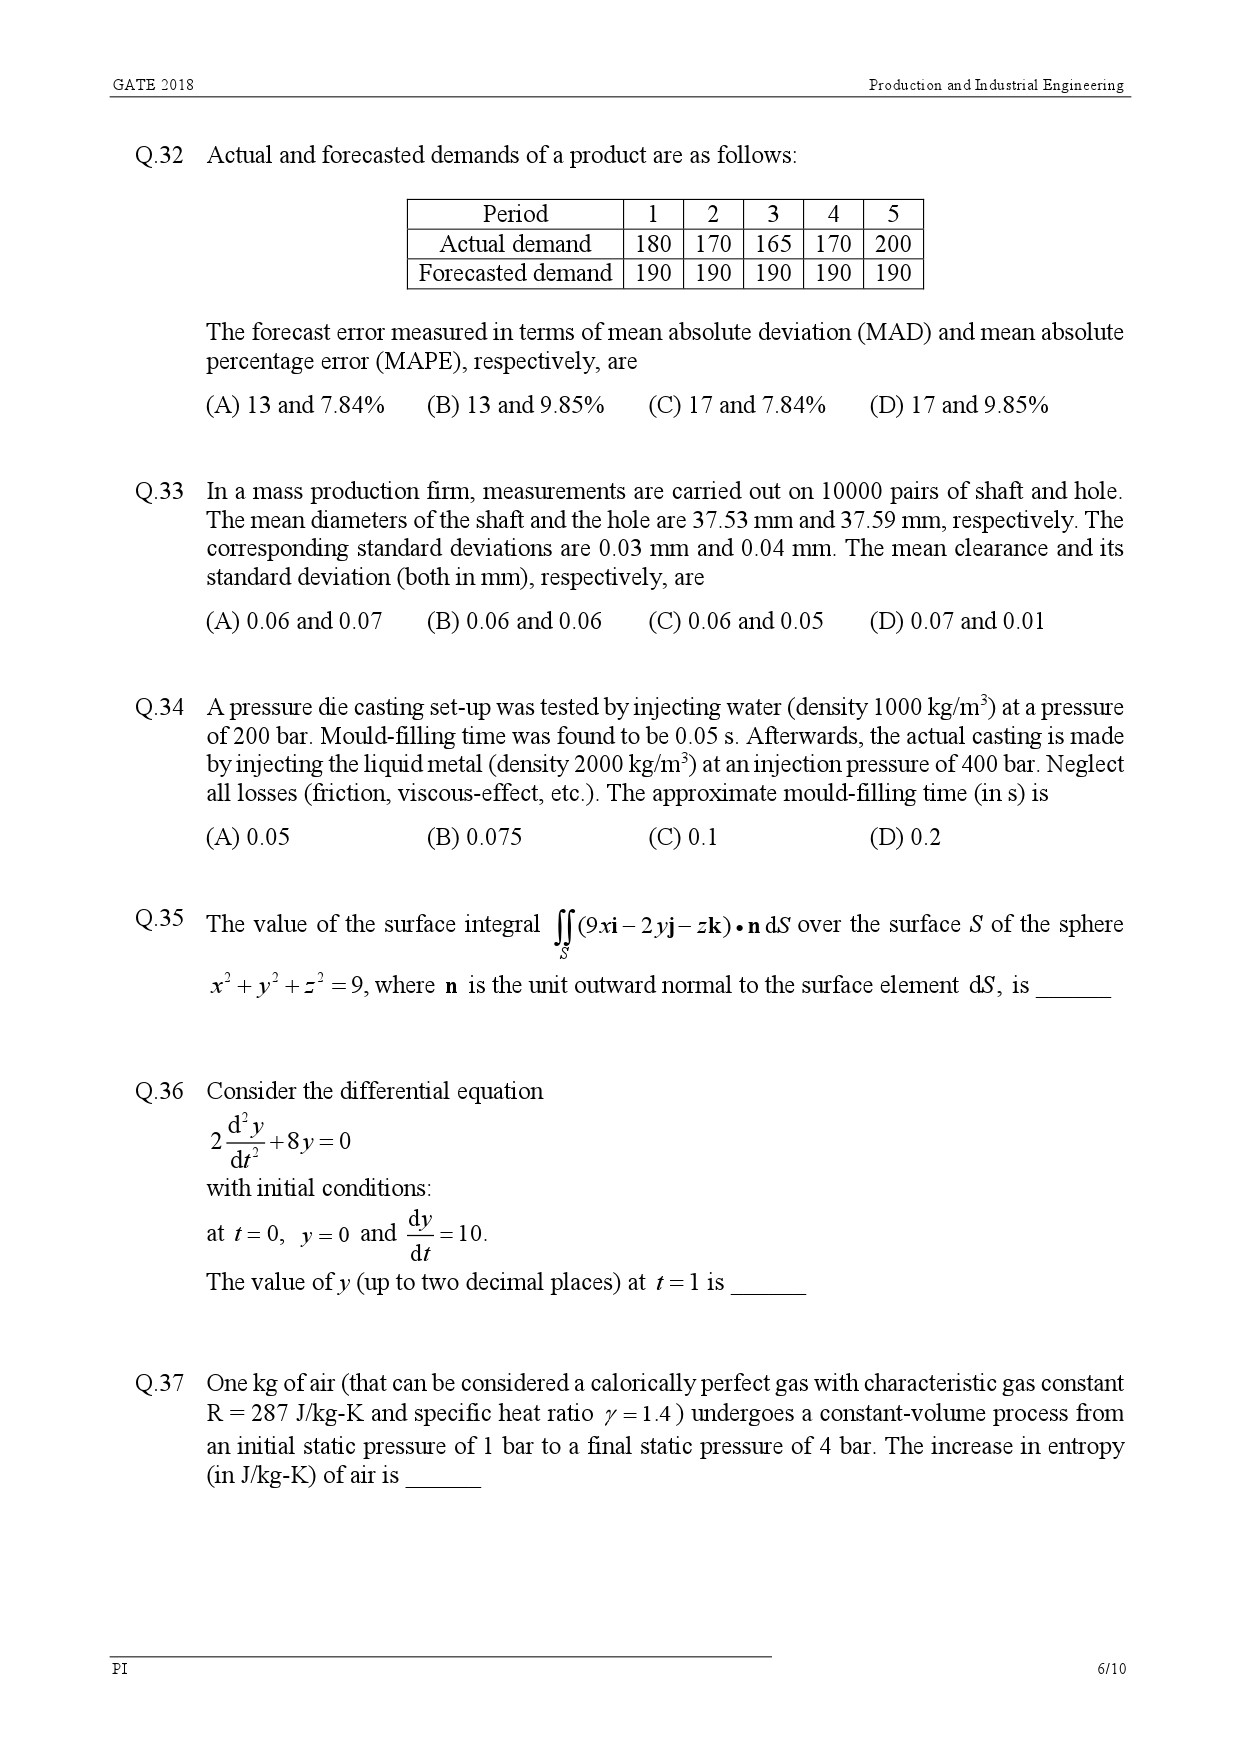 GATE Exam Question Paper 2018 Production and Industrial Engineering 9